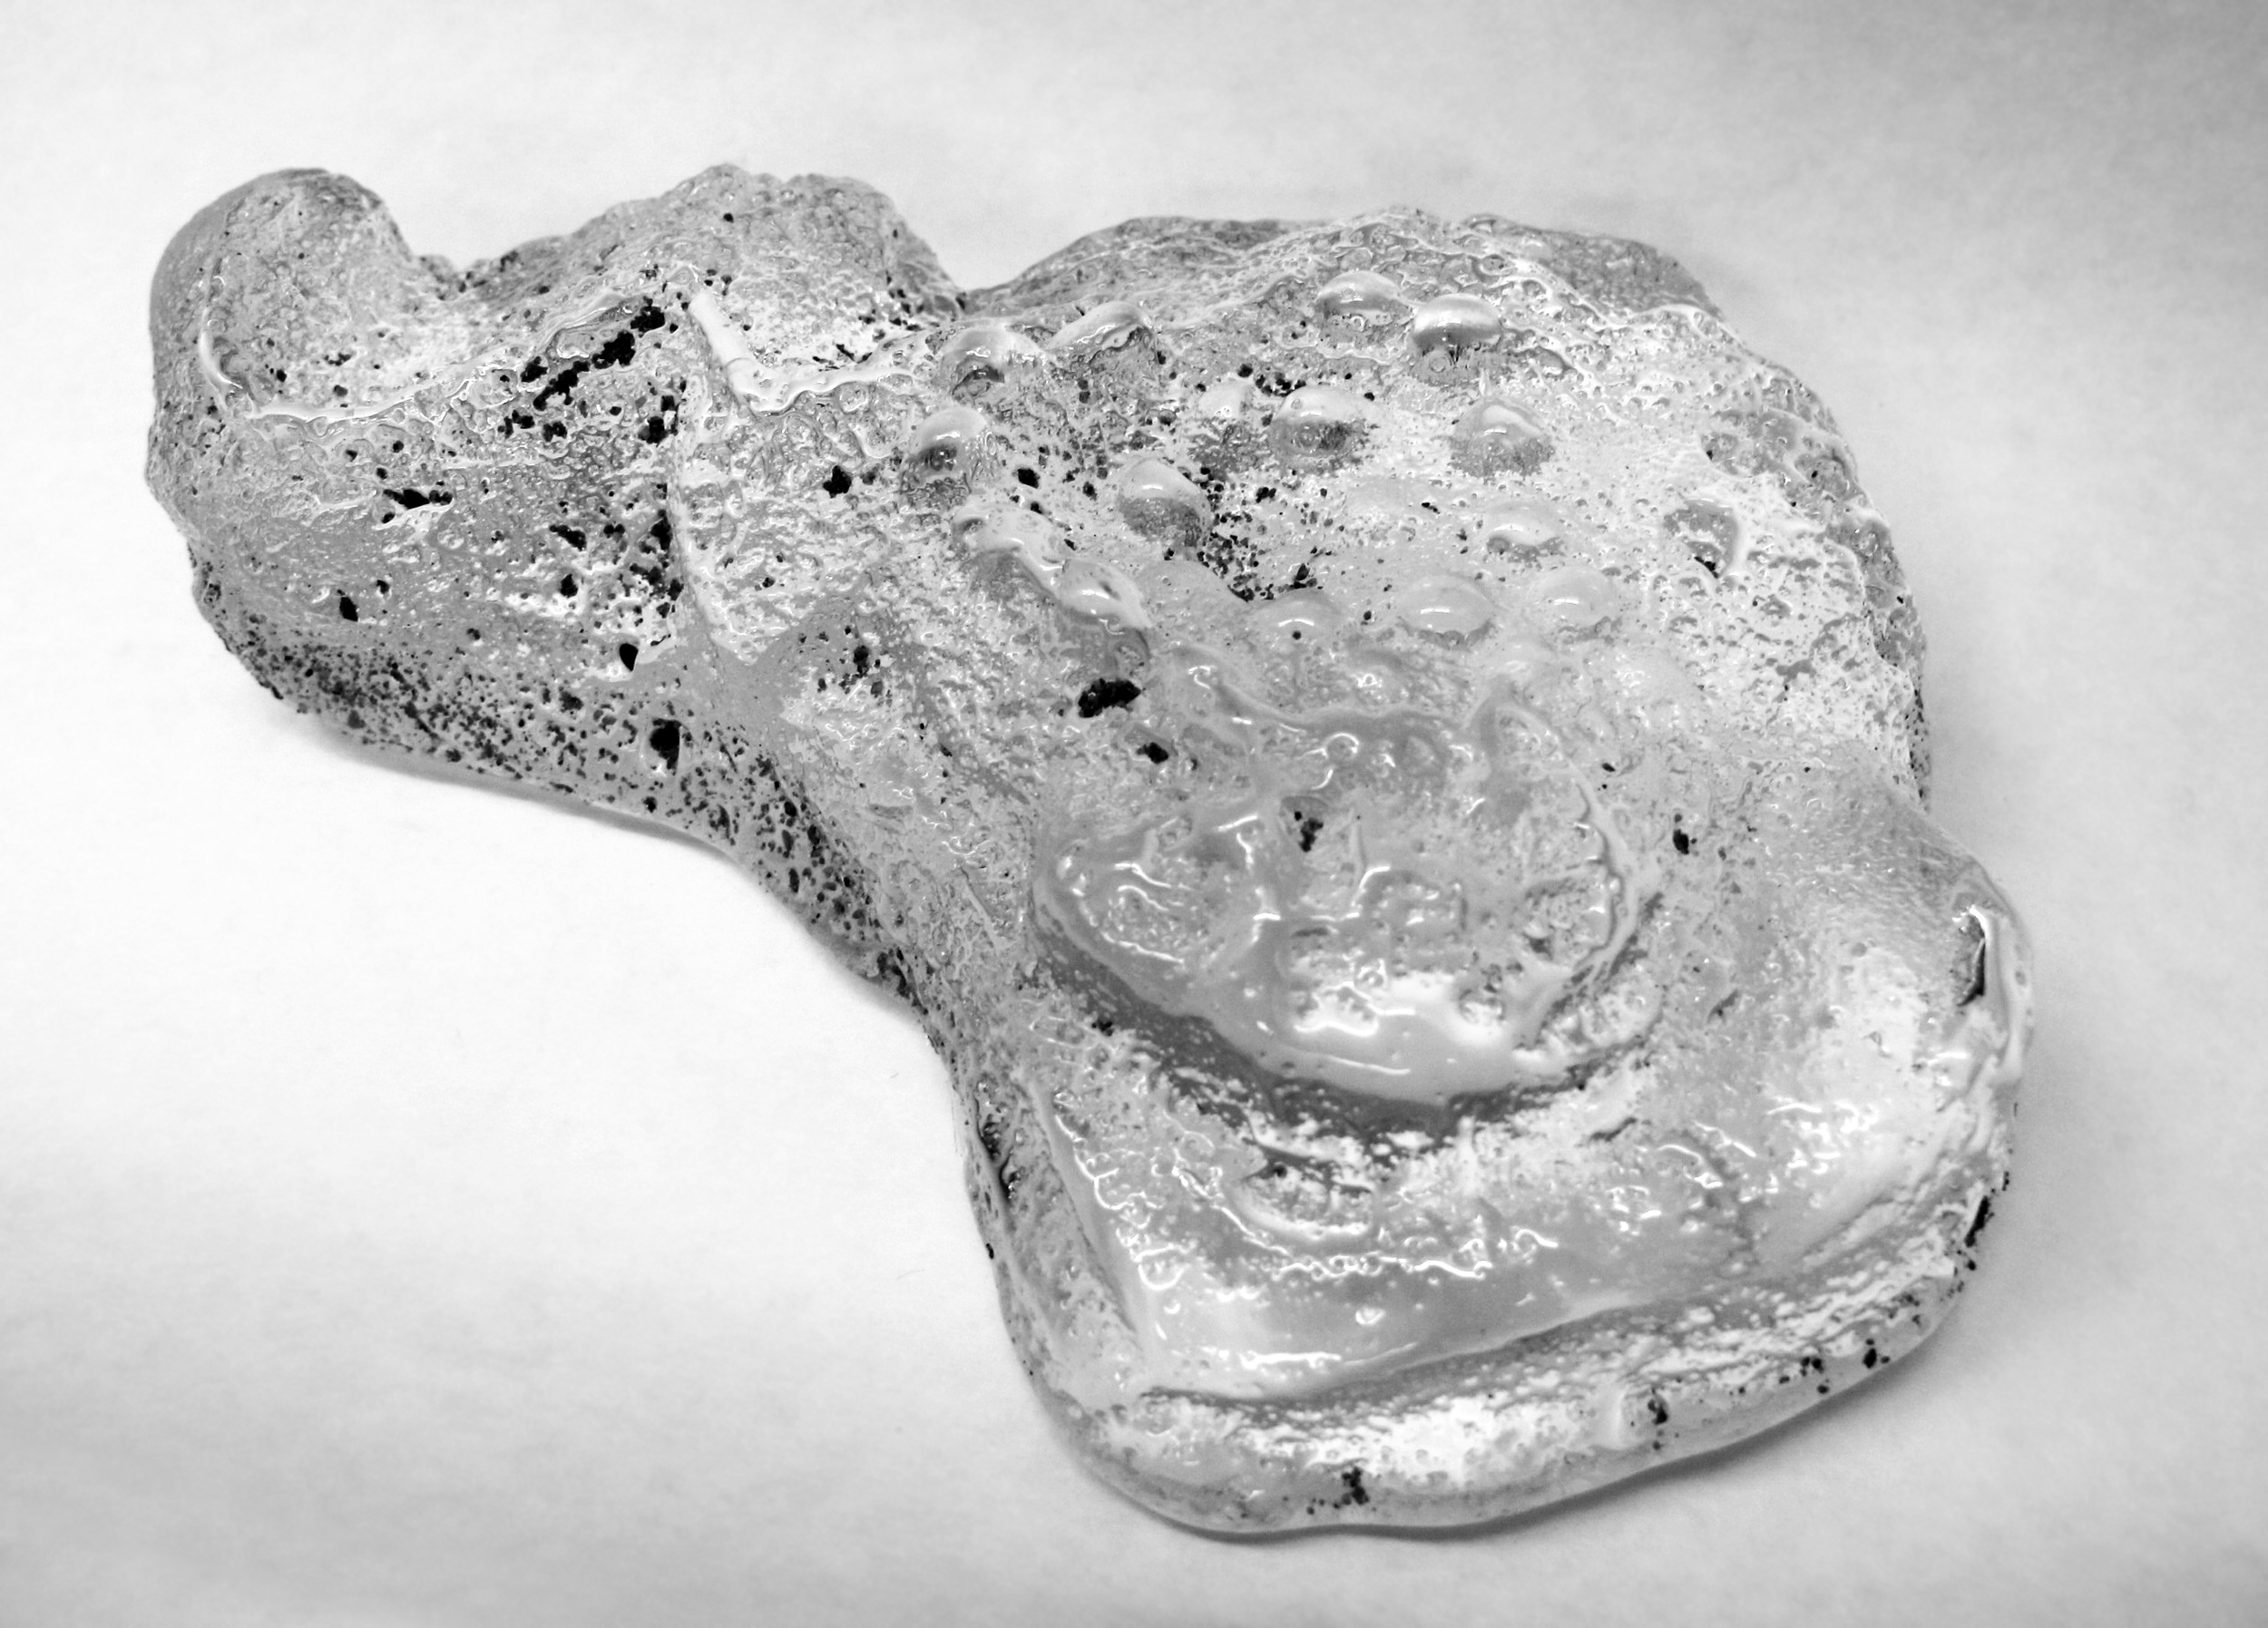   Character Nga , 2013.&nbsp;Sand casted glass,&nbsp; approx. 7" x 4" x 1.5"  